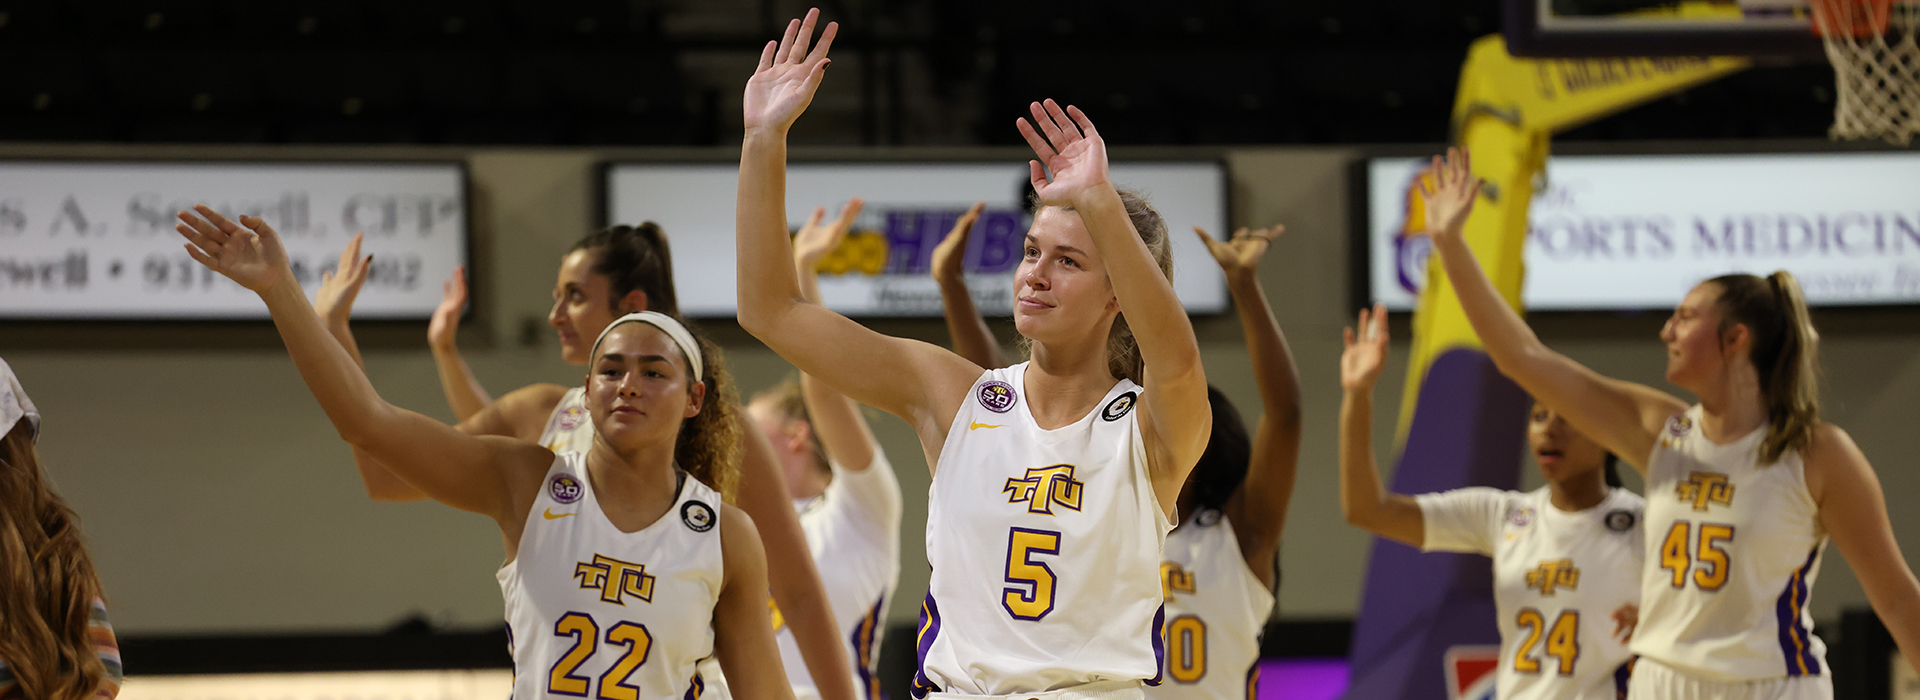 Tech women's basketball vs. SIUE on 1/20 to be televised on ESPNU